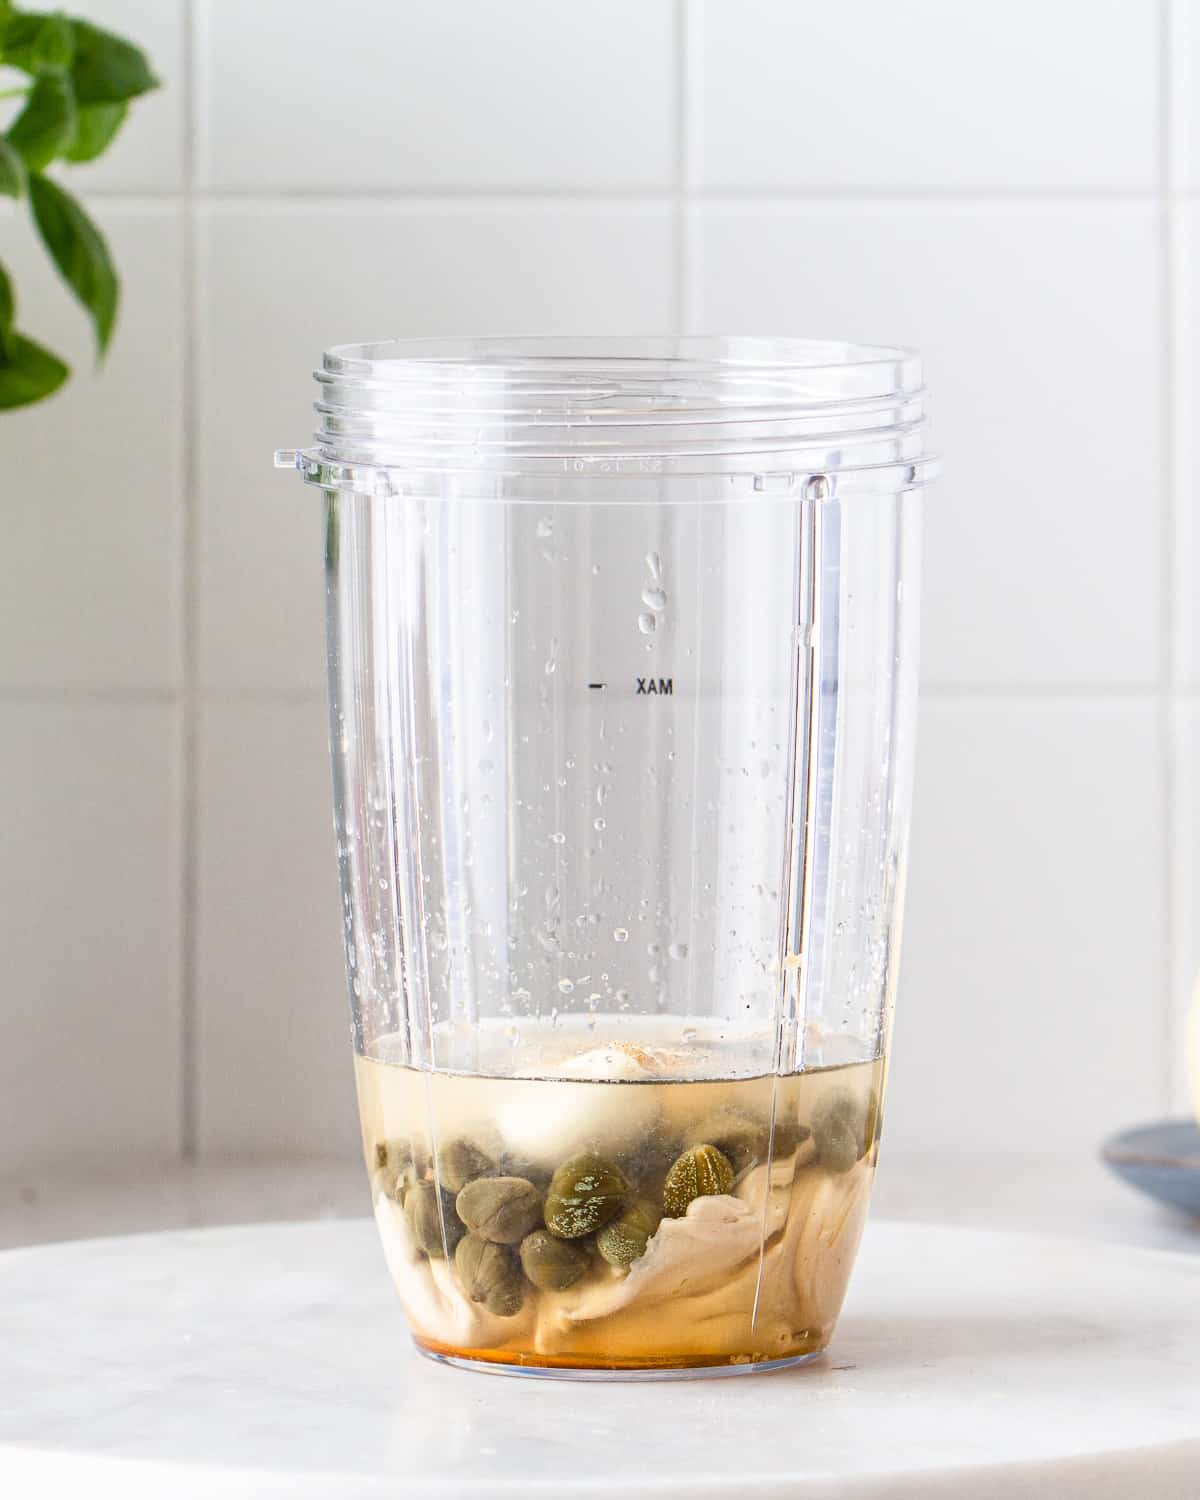 Cashew butter, capers, garlic clove, and water in a plastic blender jar.